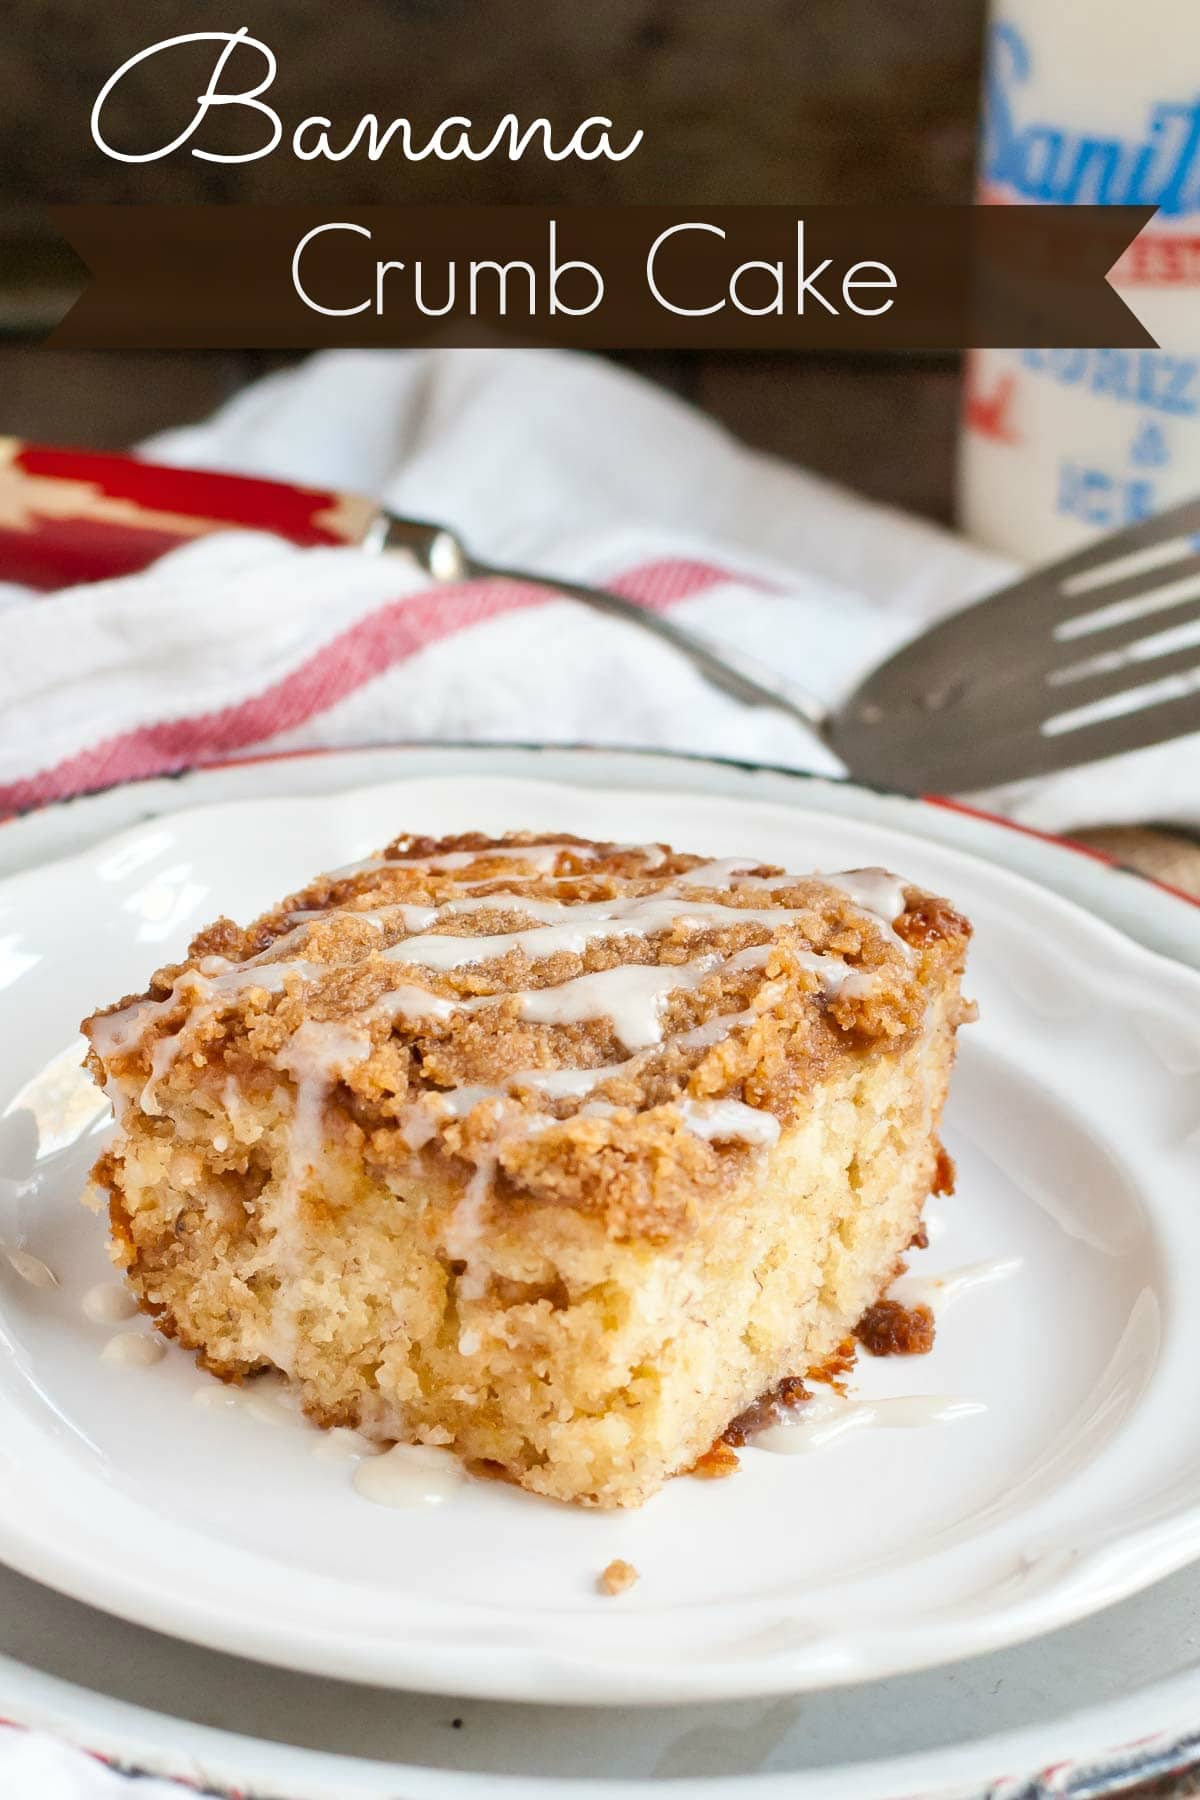 This Banana Crumb Cake is so moist and wonderful for breakfast or dessert.